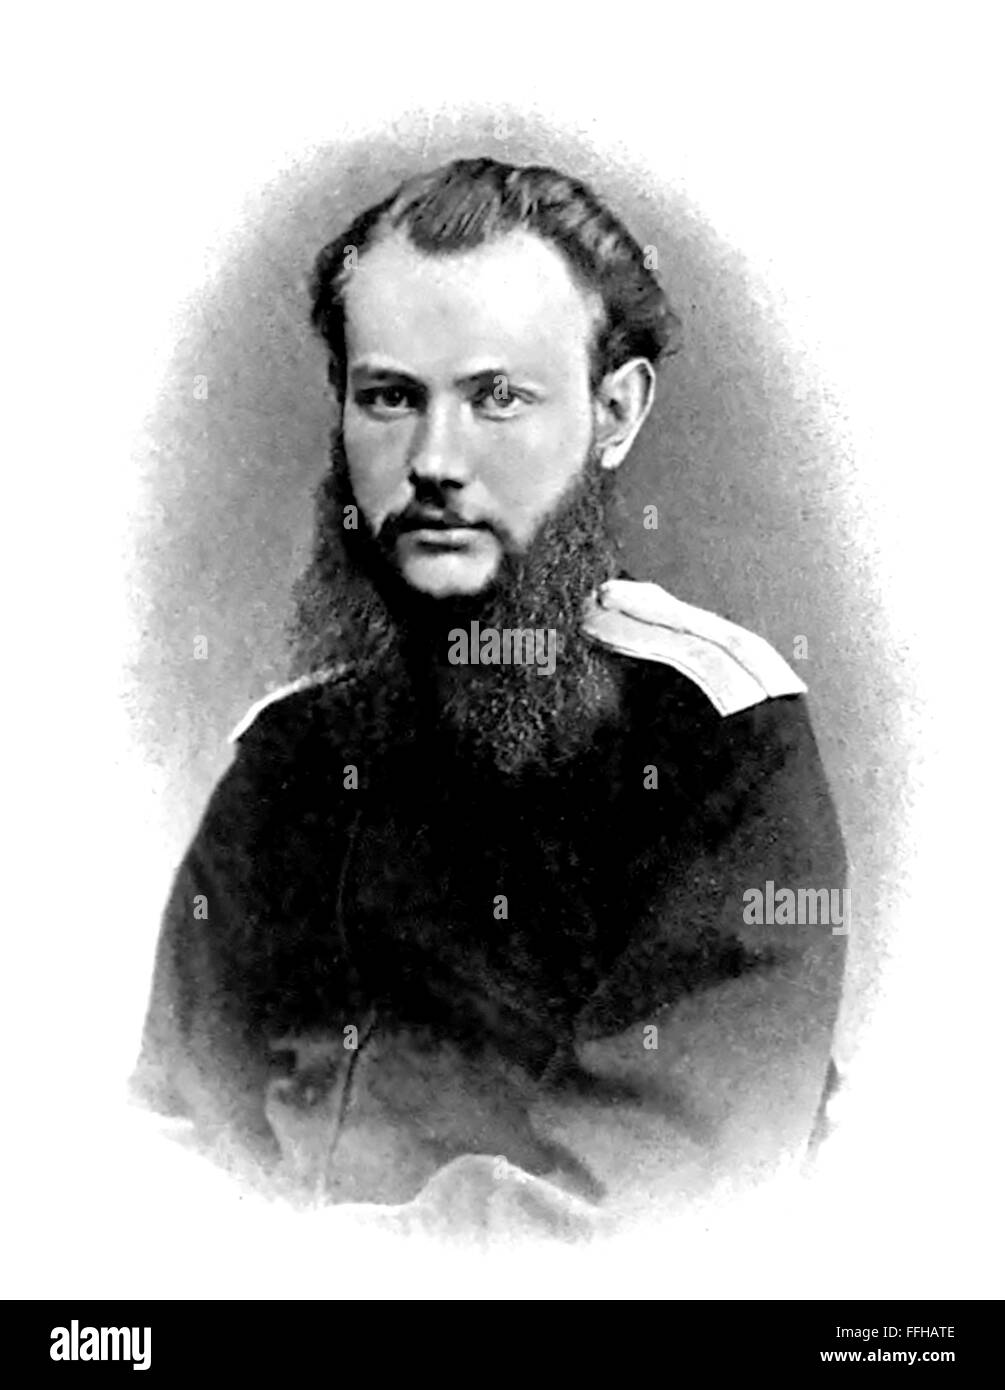 PETRER KROPOTKIN (1842-1921) Russian anarchist, zoologist explorer and writer in 1864 while in the army Stock Photo